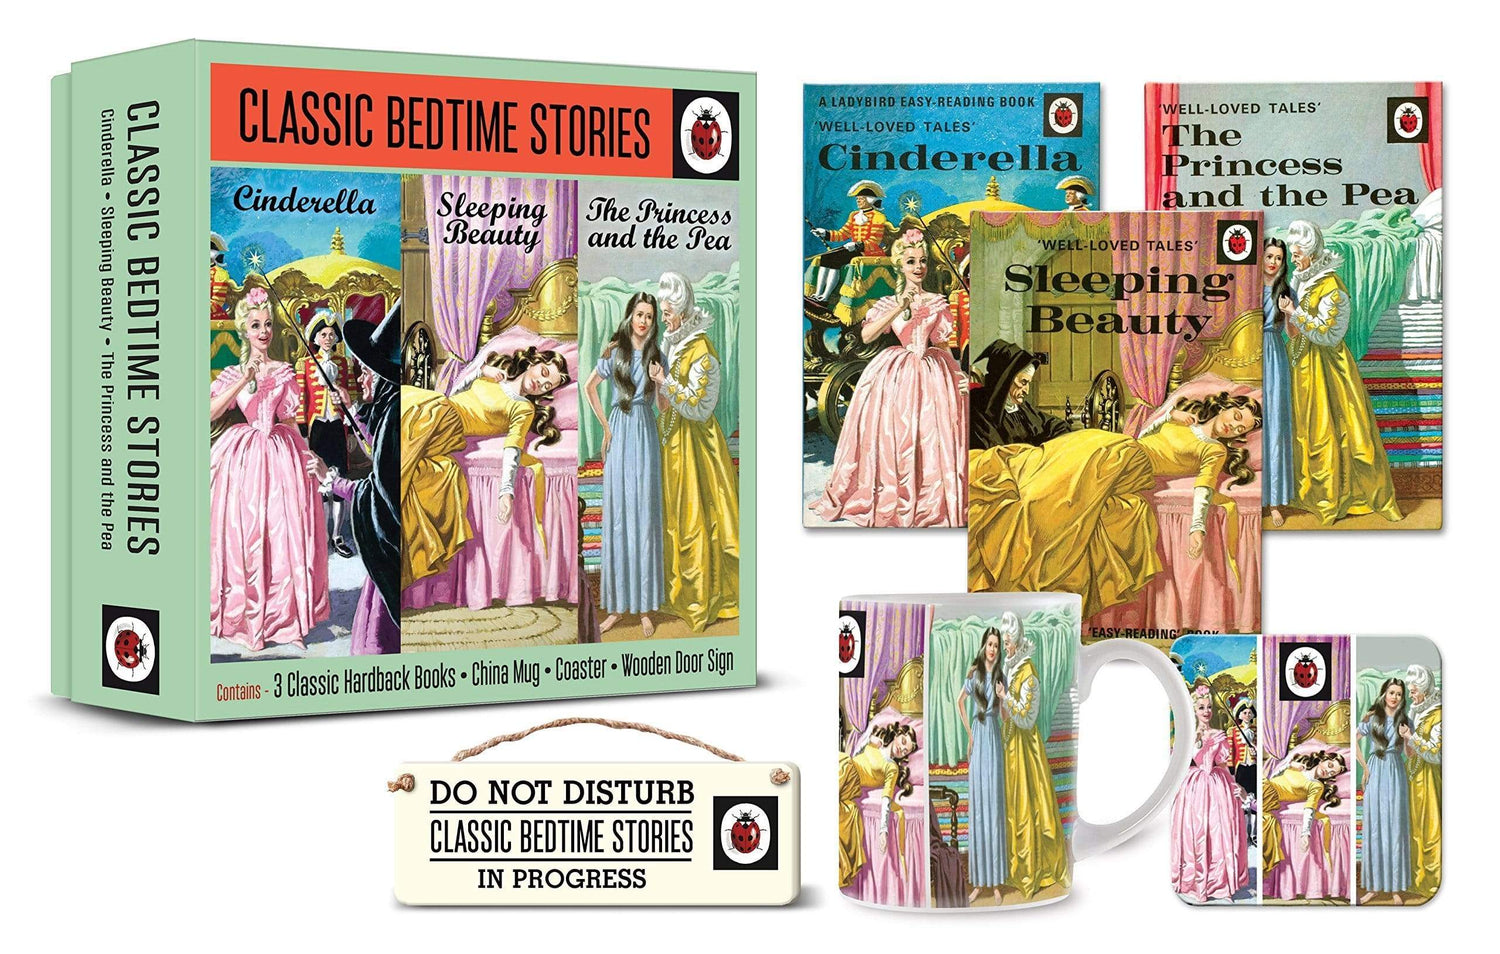 Ladybird Classic Bedtime Stories Box Set: Cinderella, Sleeping Beauty, The princess and the Pea